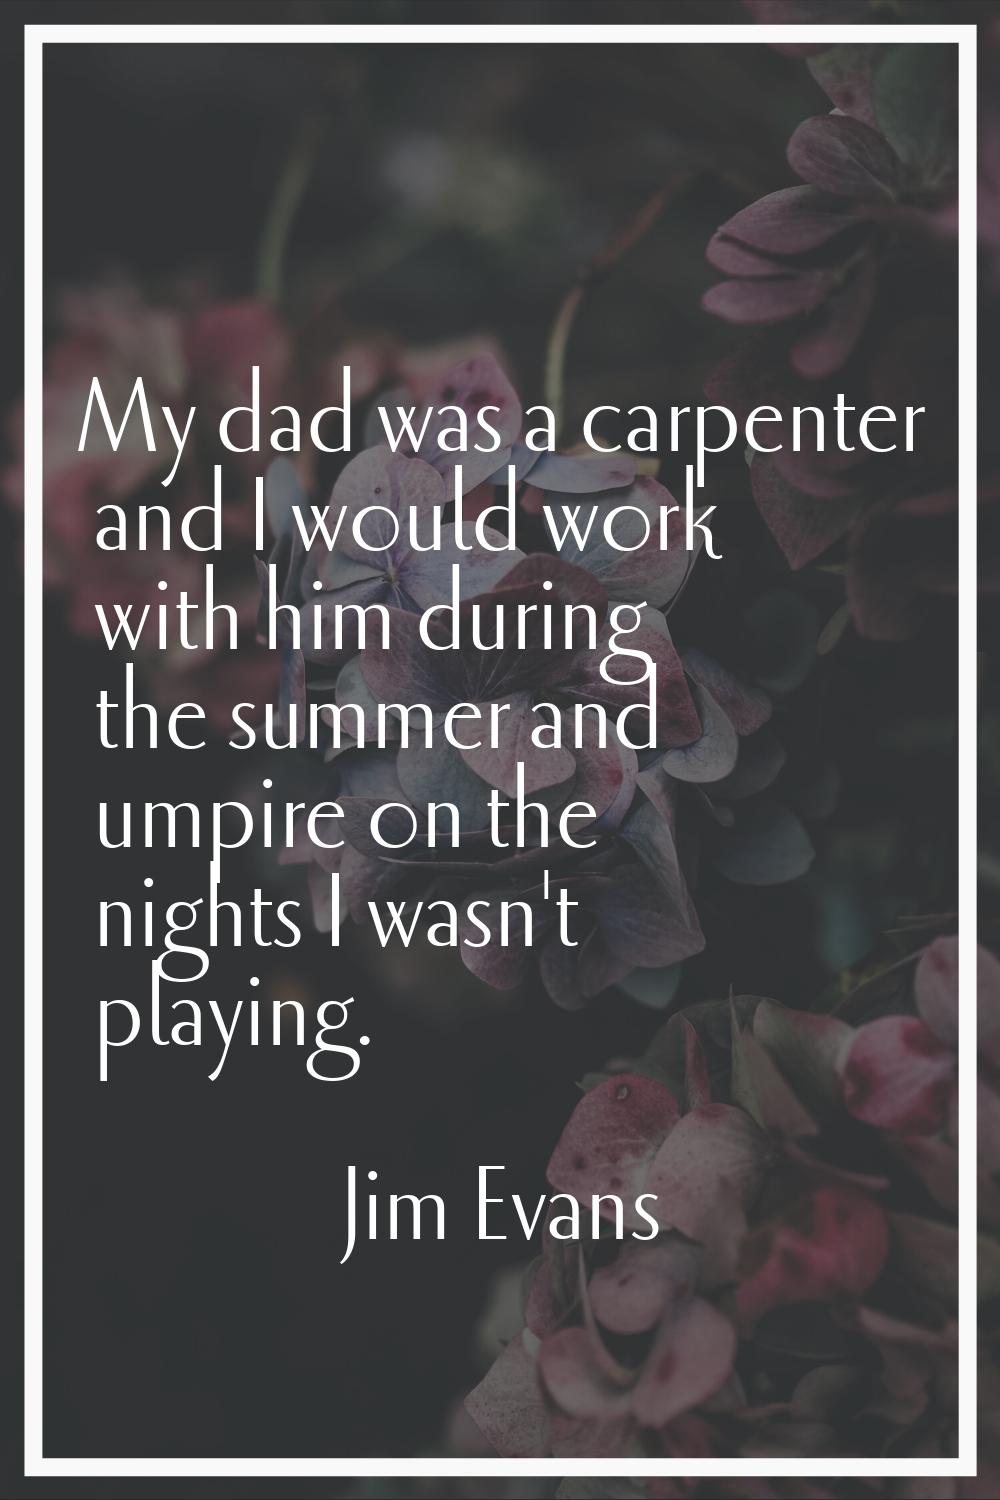 My dad was a carpenter and I would work with him during the summer and umpire on the nights I wasn'